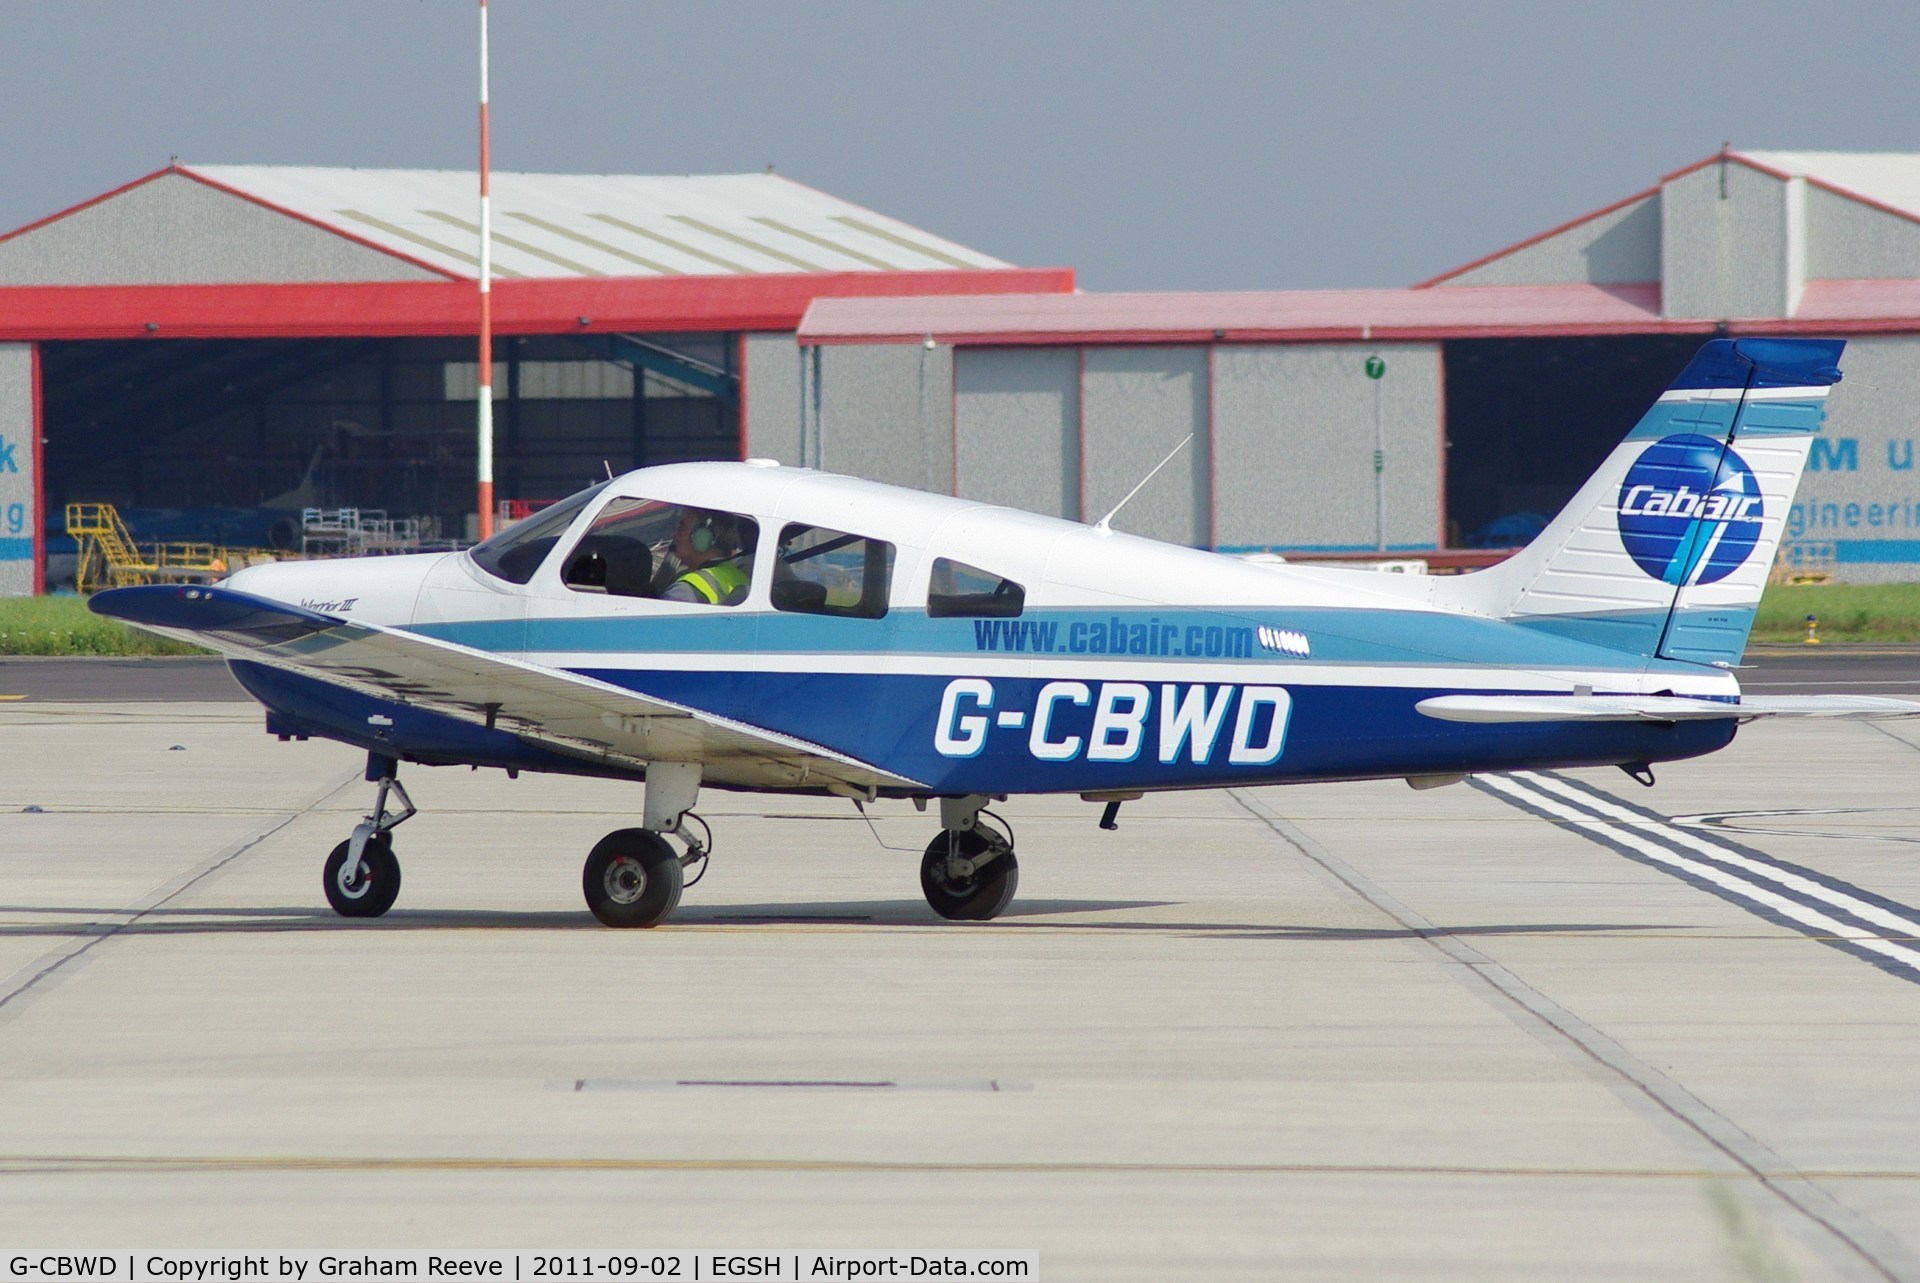 G-CBWD, 2002 Piper PA-28-161 Cherokee Warrior III C/N 2842160, About to depart.